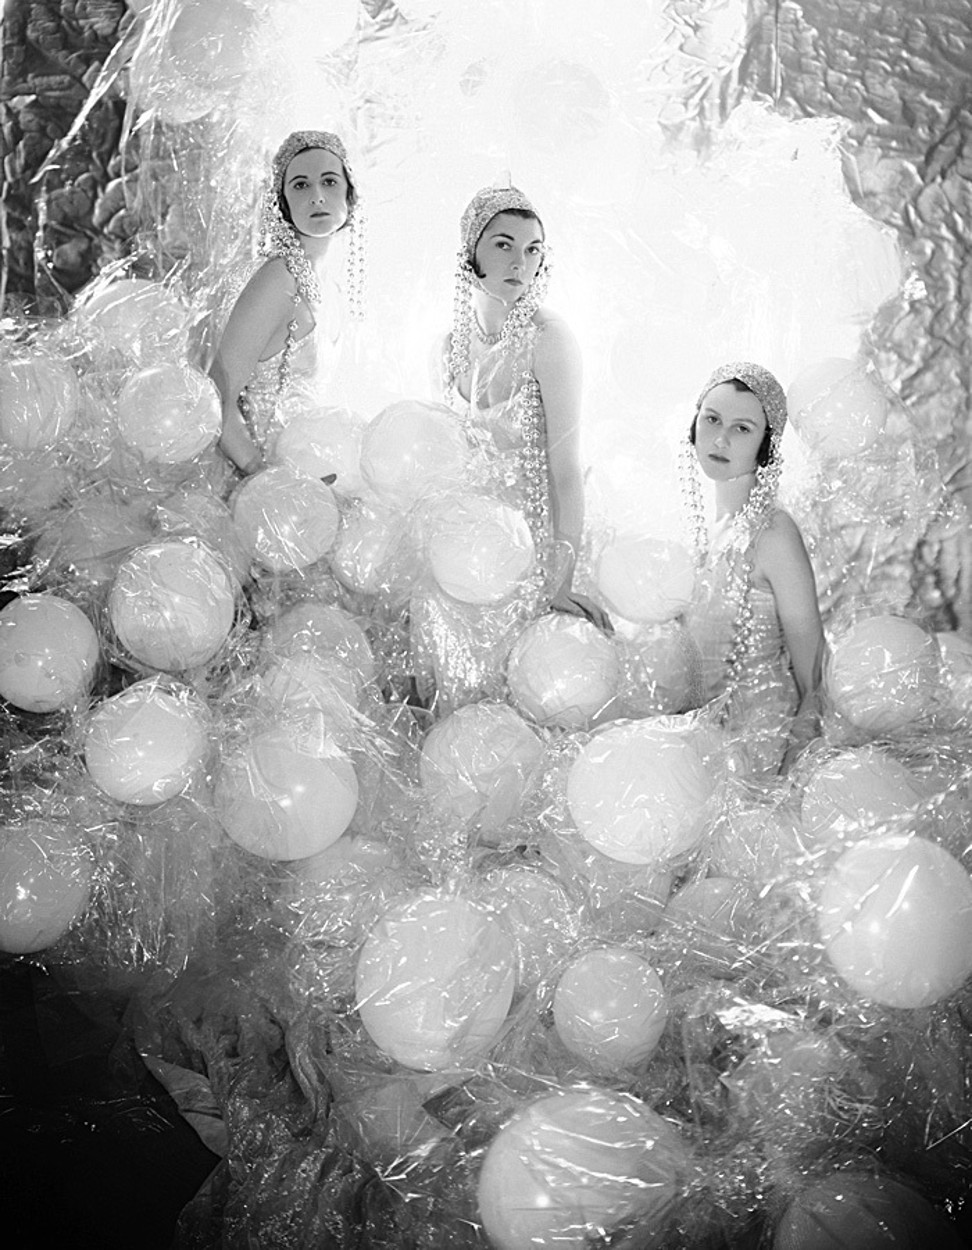 Portrait of the Soapsuds Group, by Beaton (1930). Photo: Cecil Beaton